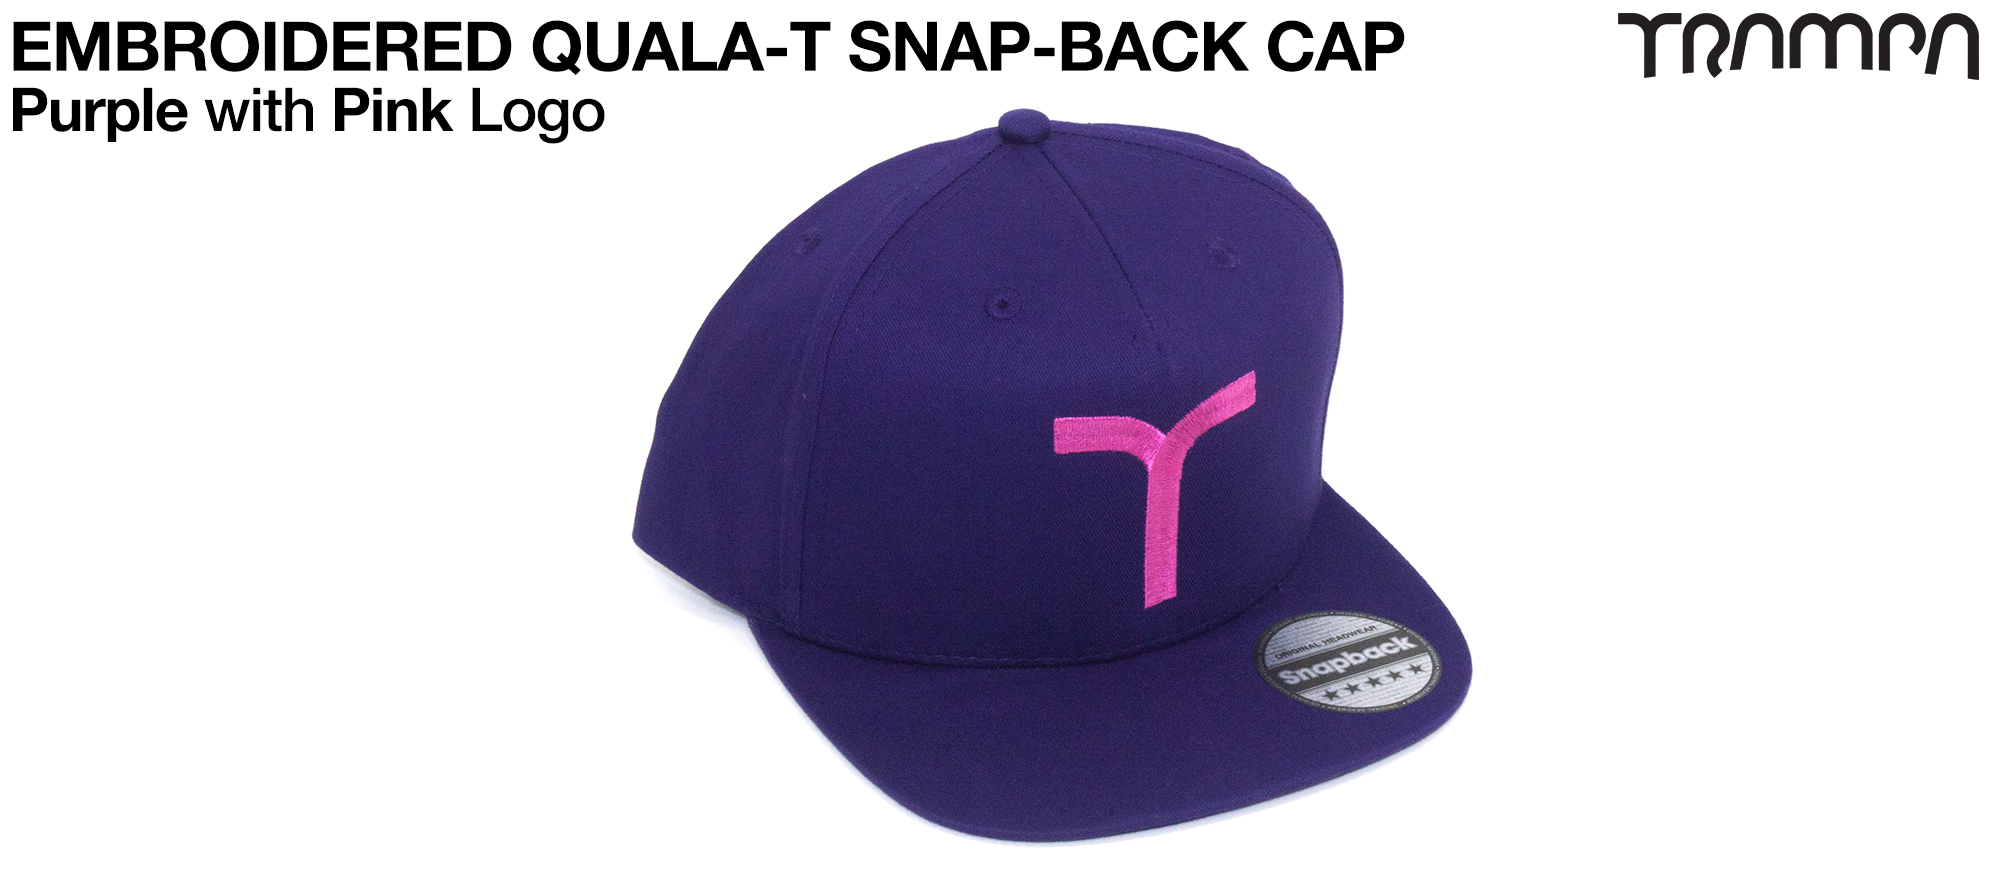 PURPLE SNAPBACK Cap with Vivid PINK QUALA-T embroidered logo